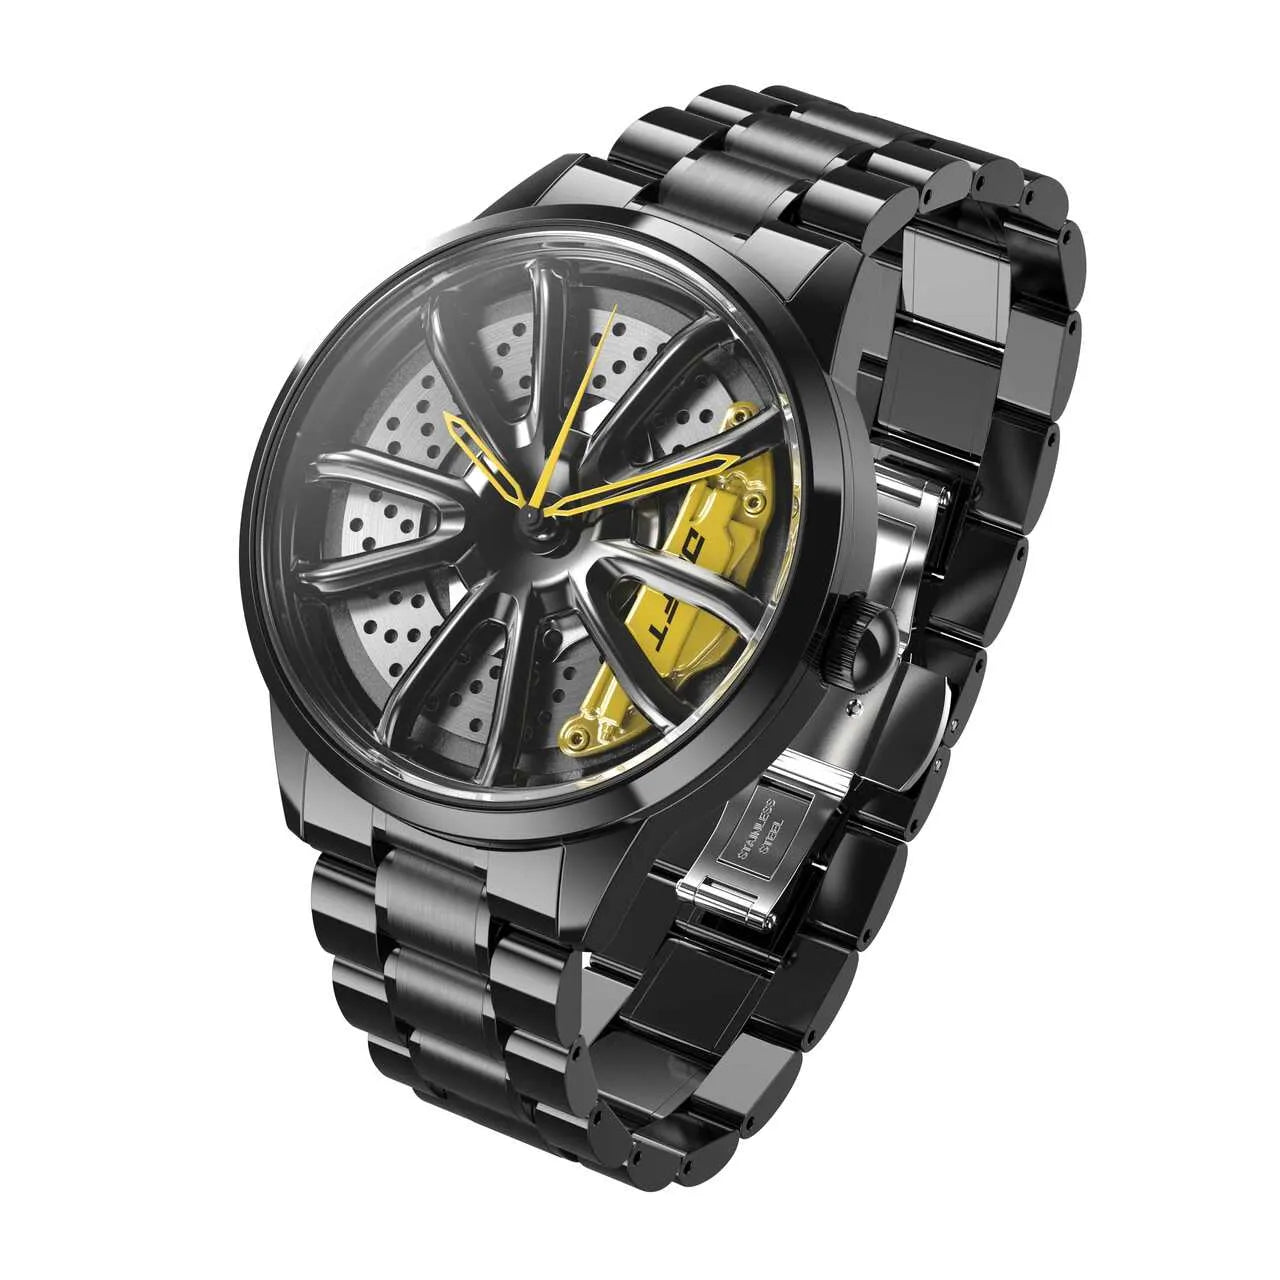 Illuminate your look with our dynamic yellow Performance GT Rim Watch! Engineered by a German startup, these precision watches are tailored to captivate motorsport, tuning, and auto enthusiasts. Get set to fuel your passion! #id_46744365433162